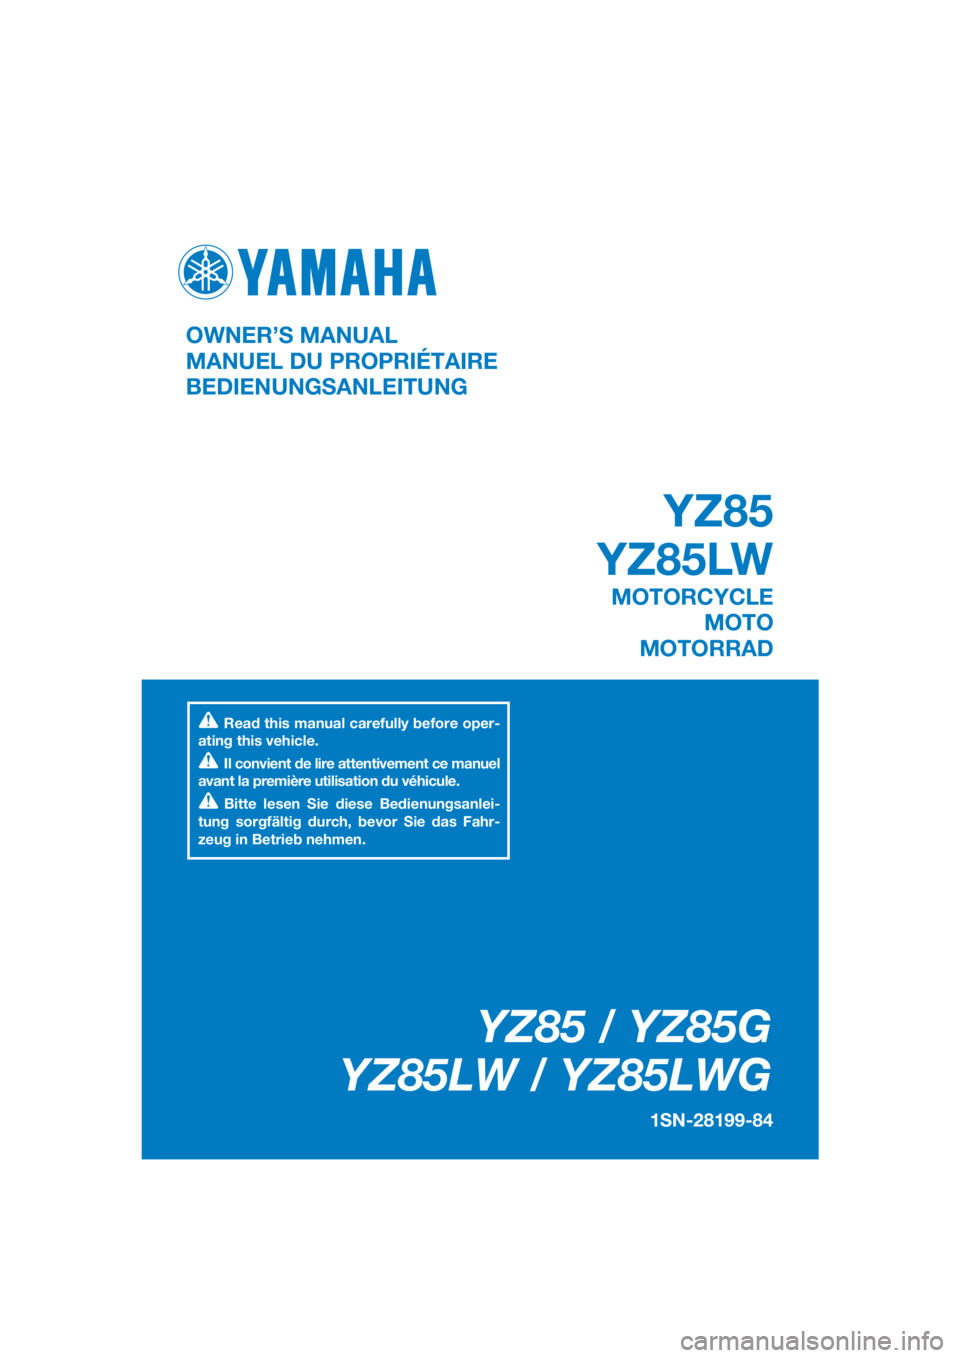 YAMAHA YZ85 2016  Notices Demploi (in French) DIC183
YZ85 / YZ85G
YZ85LW / YZ85LWG
1SN-28199-84
OWNER’S MANUAL
MANUEL DU PROPRIÉTAIRE
BEDIENUNGSANLEITUNG
Read this manual carefully before oper-
ating this vehicle.
Il convient de lire attentive